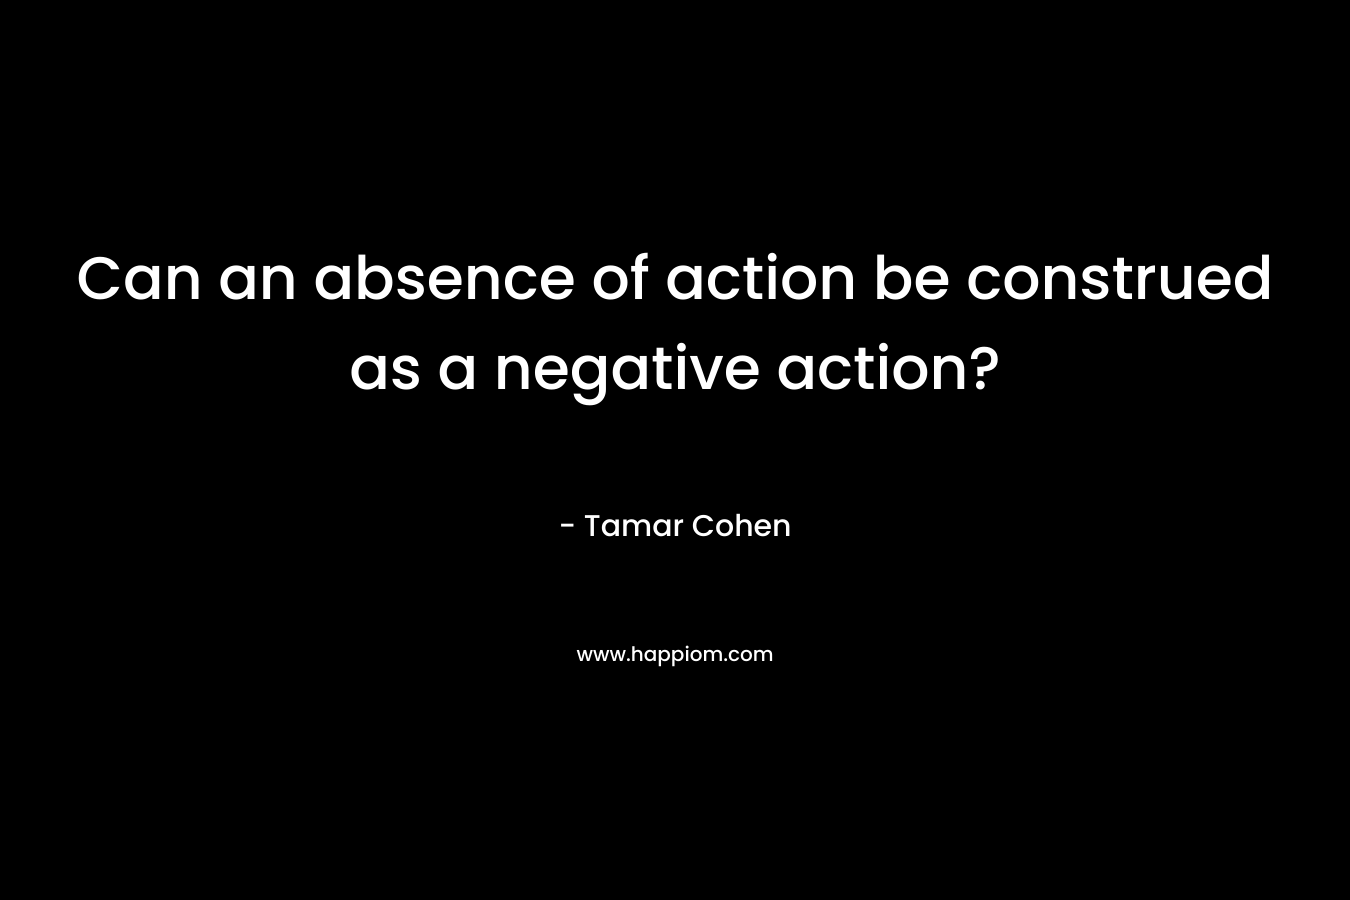 Can an absence of action be construed as a negative action? – Tamar Cohen